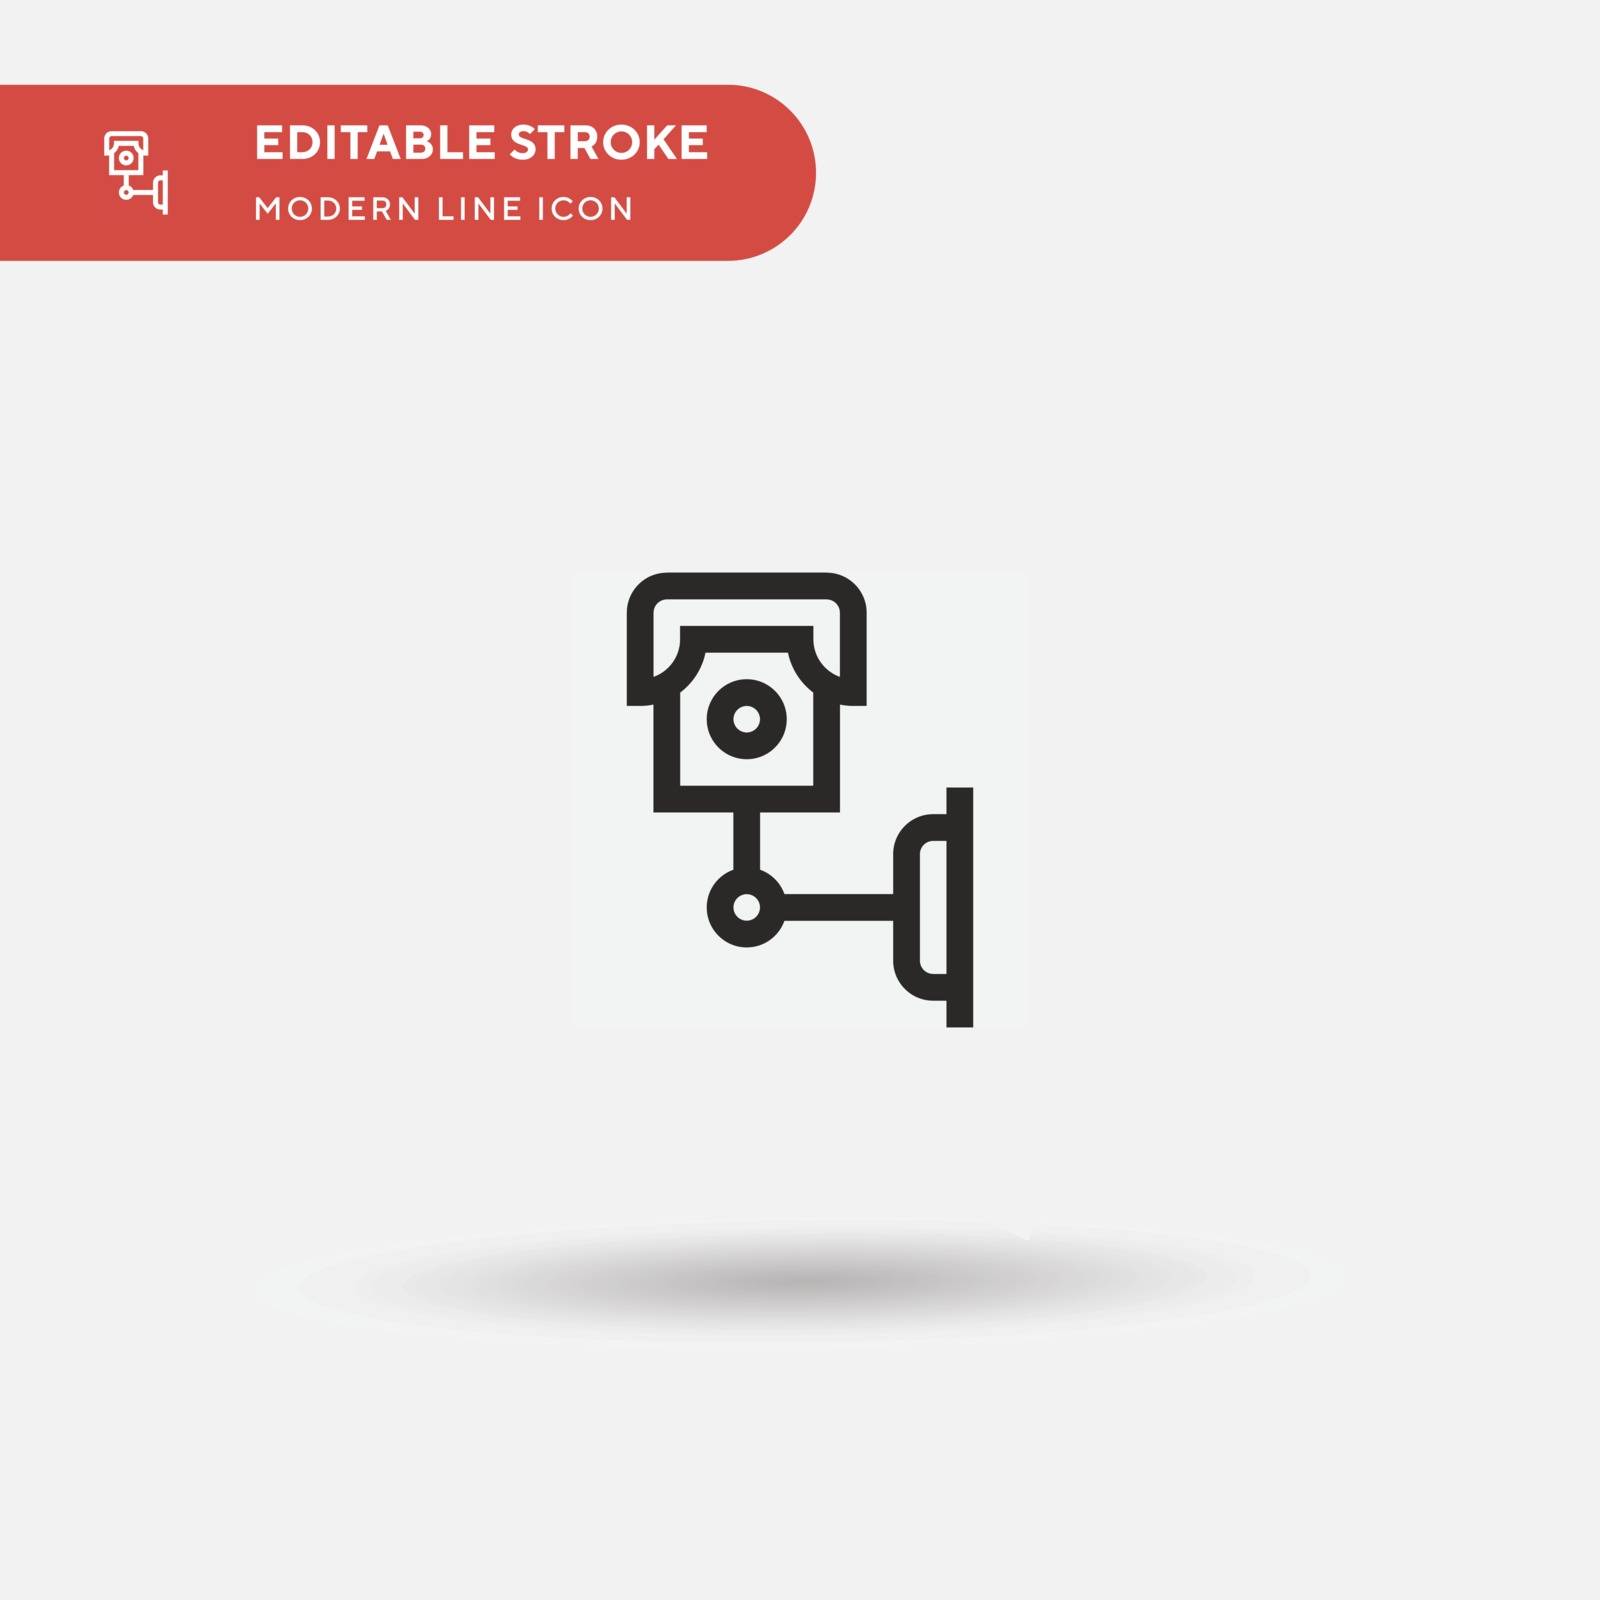 Cctv Simple vector icon. Illustration symbol design template for by guapoo